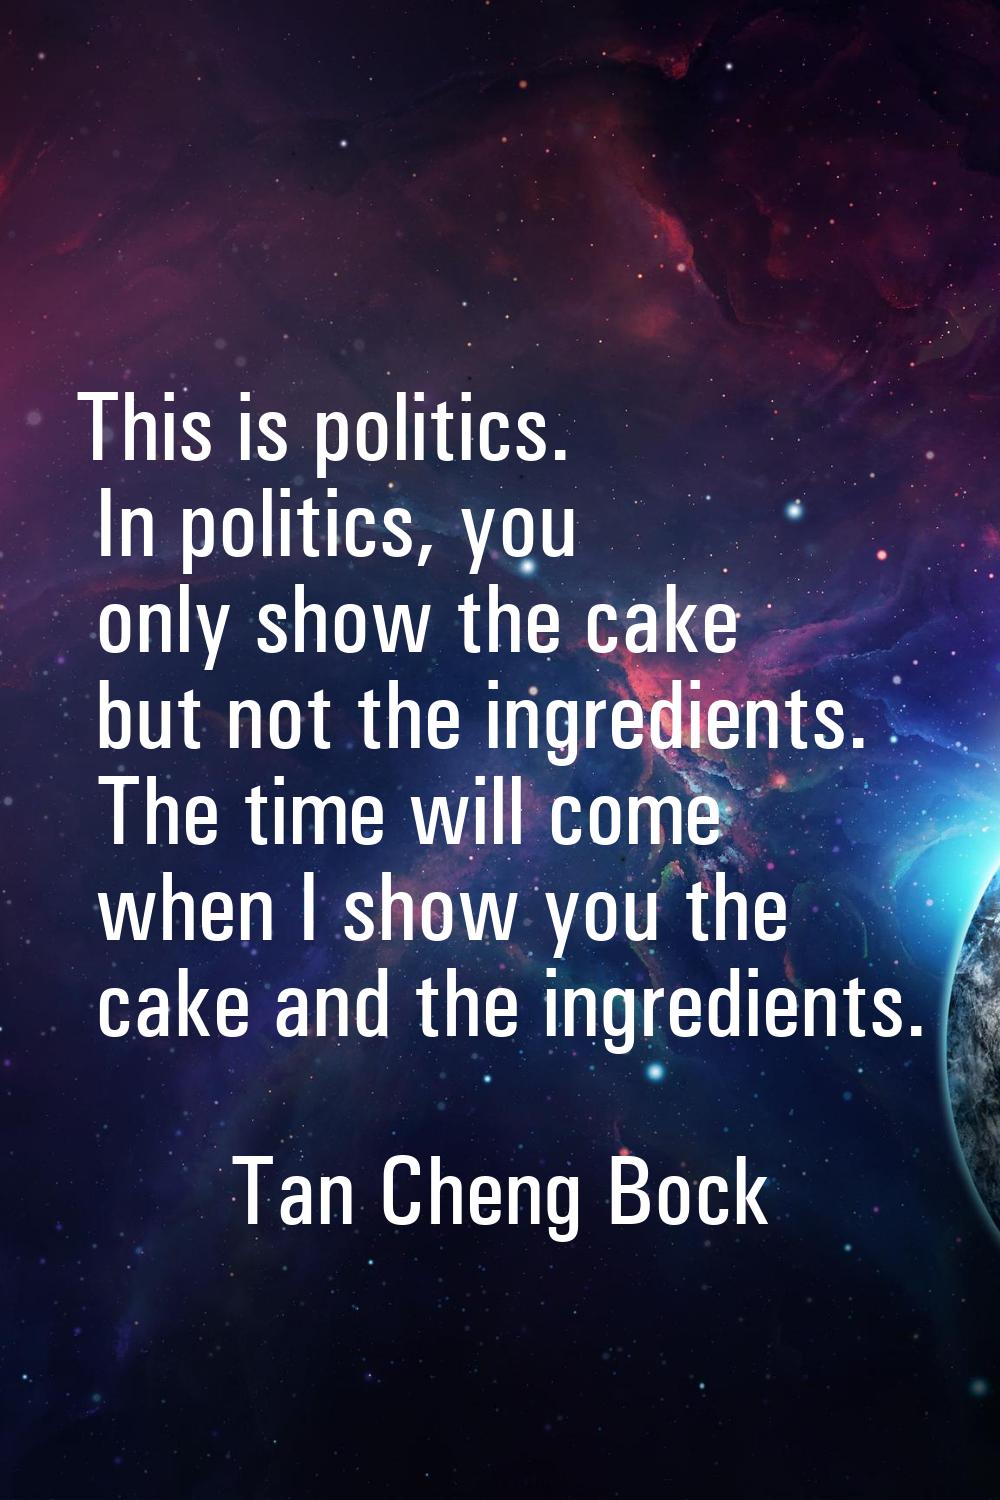 This is politics. In politics, you only show the cake but not the ingredients. The time will come w